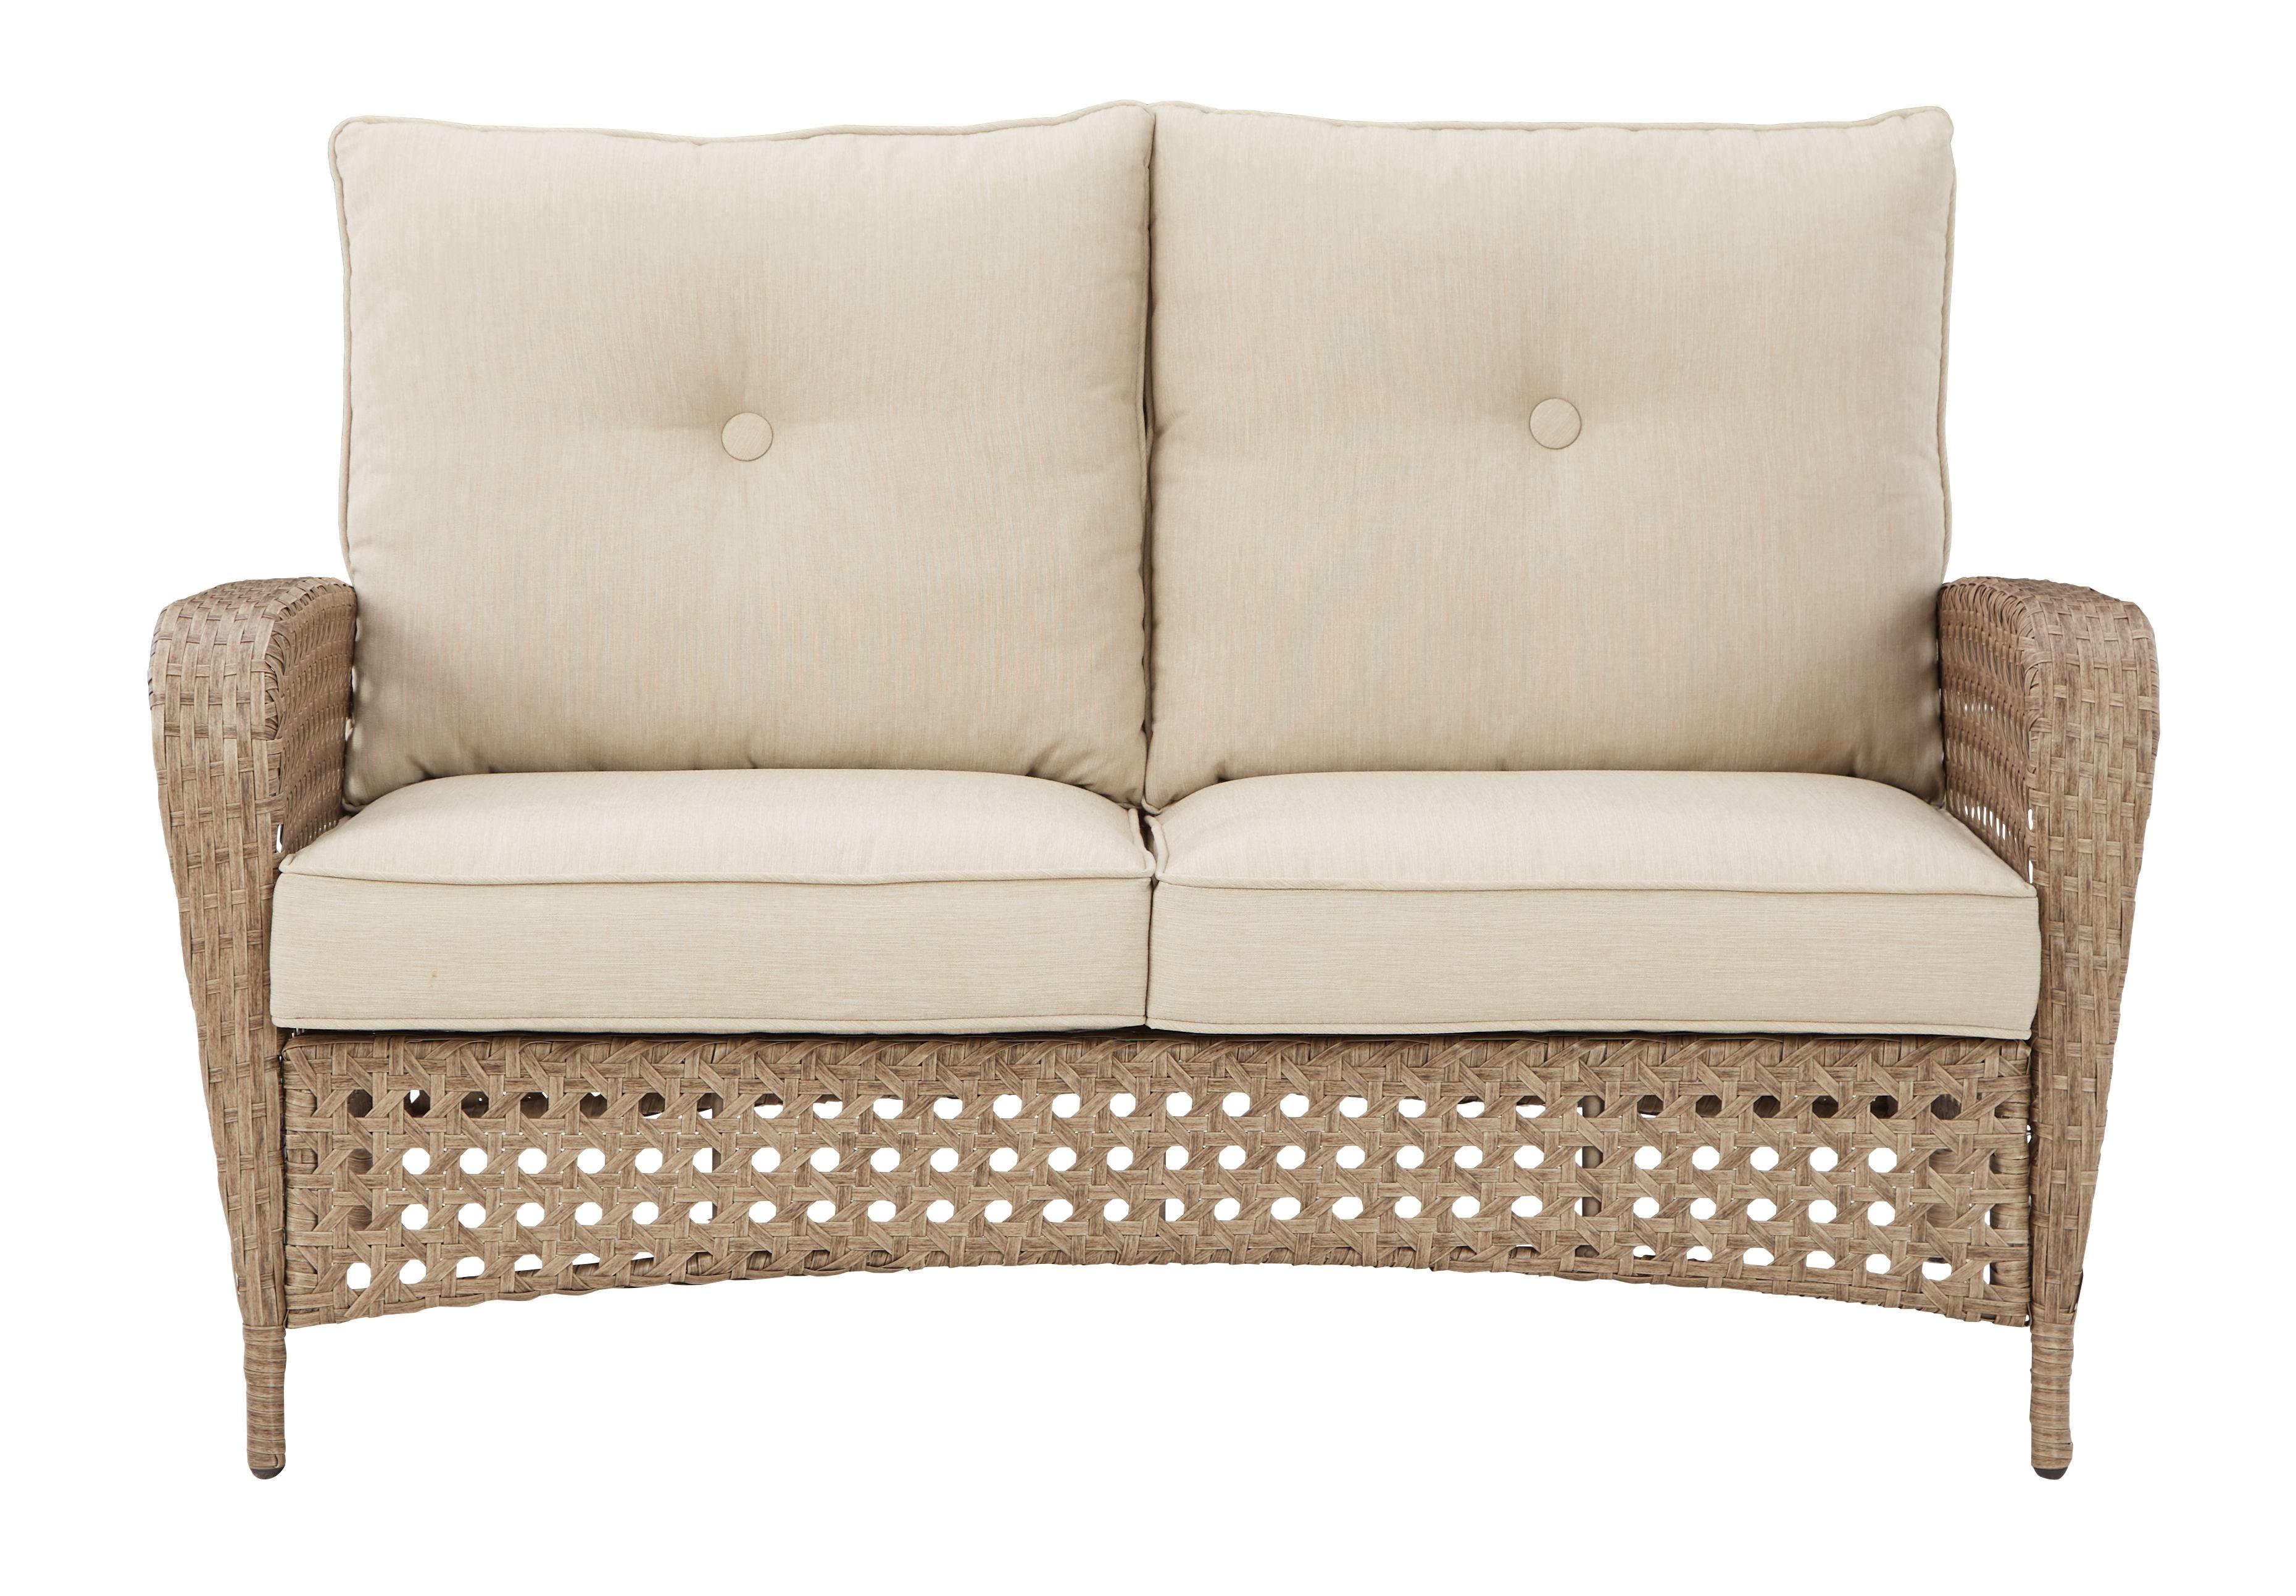 Signature Design by Ashley® - Braylee - Outdoor Set - 5th Avenue Furniture